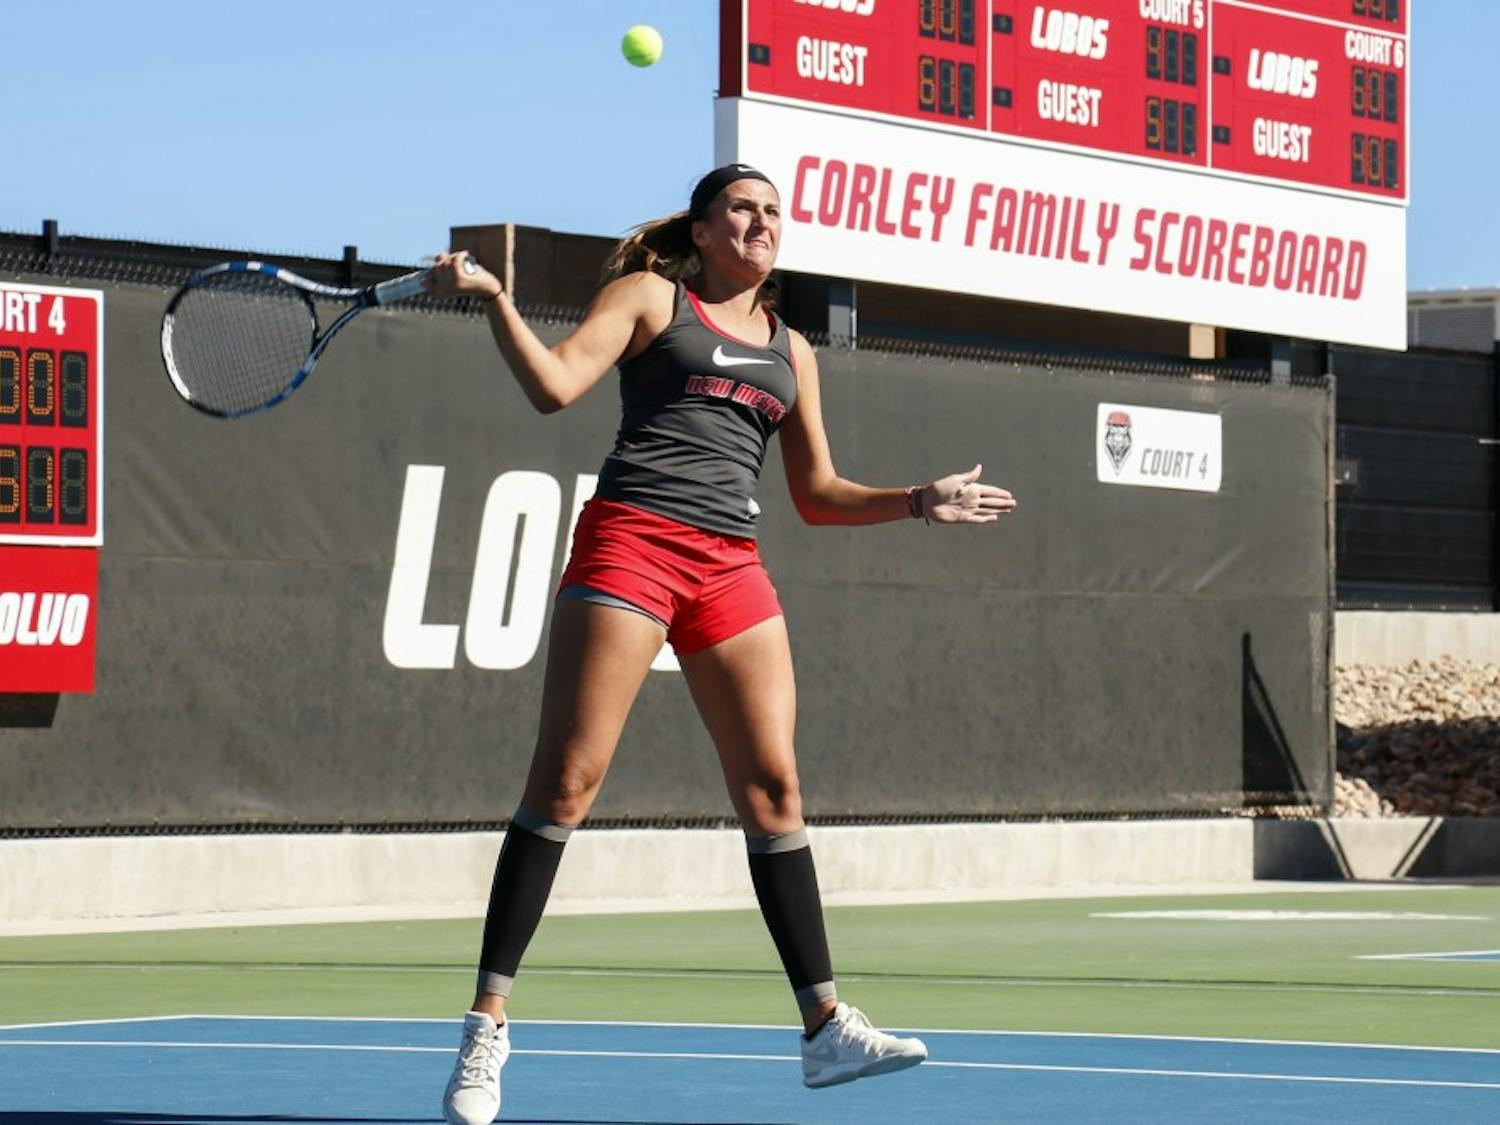 Junior Ludivine Burguiere arches back to return the ball Nov. 1, 2015 at the McKinnon Family Tennis Center. The Lobos beat Colorado Friday 5-2 and will play Southern Illinois on Saturday.